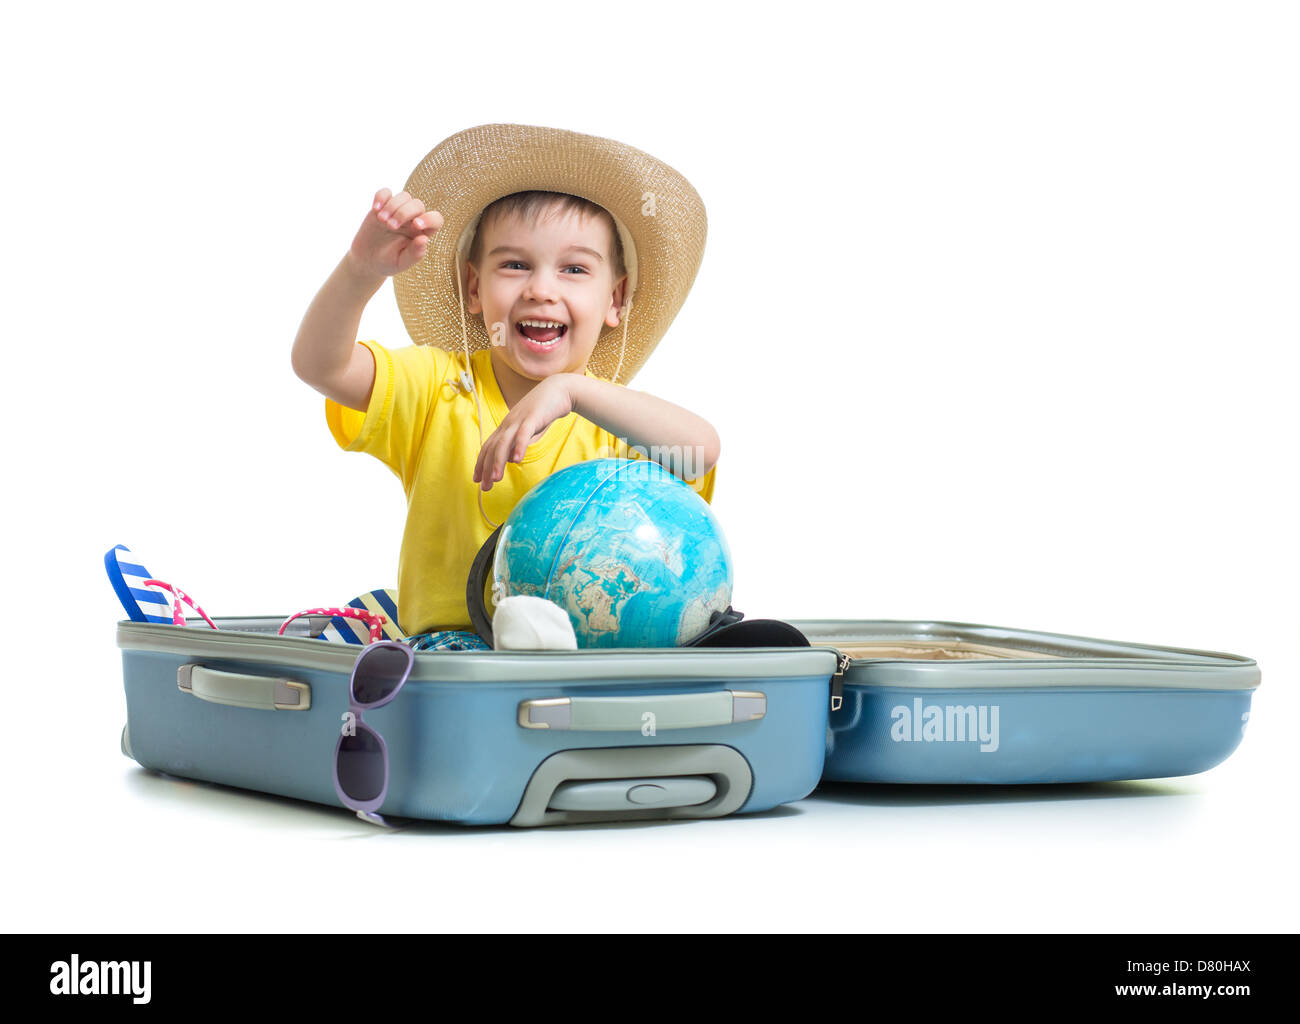 Happy kid sitting in suitcase prepared for vacation Stock Photo